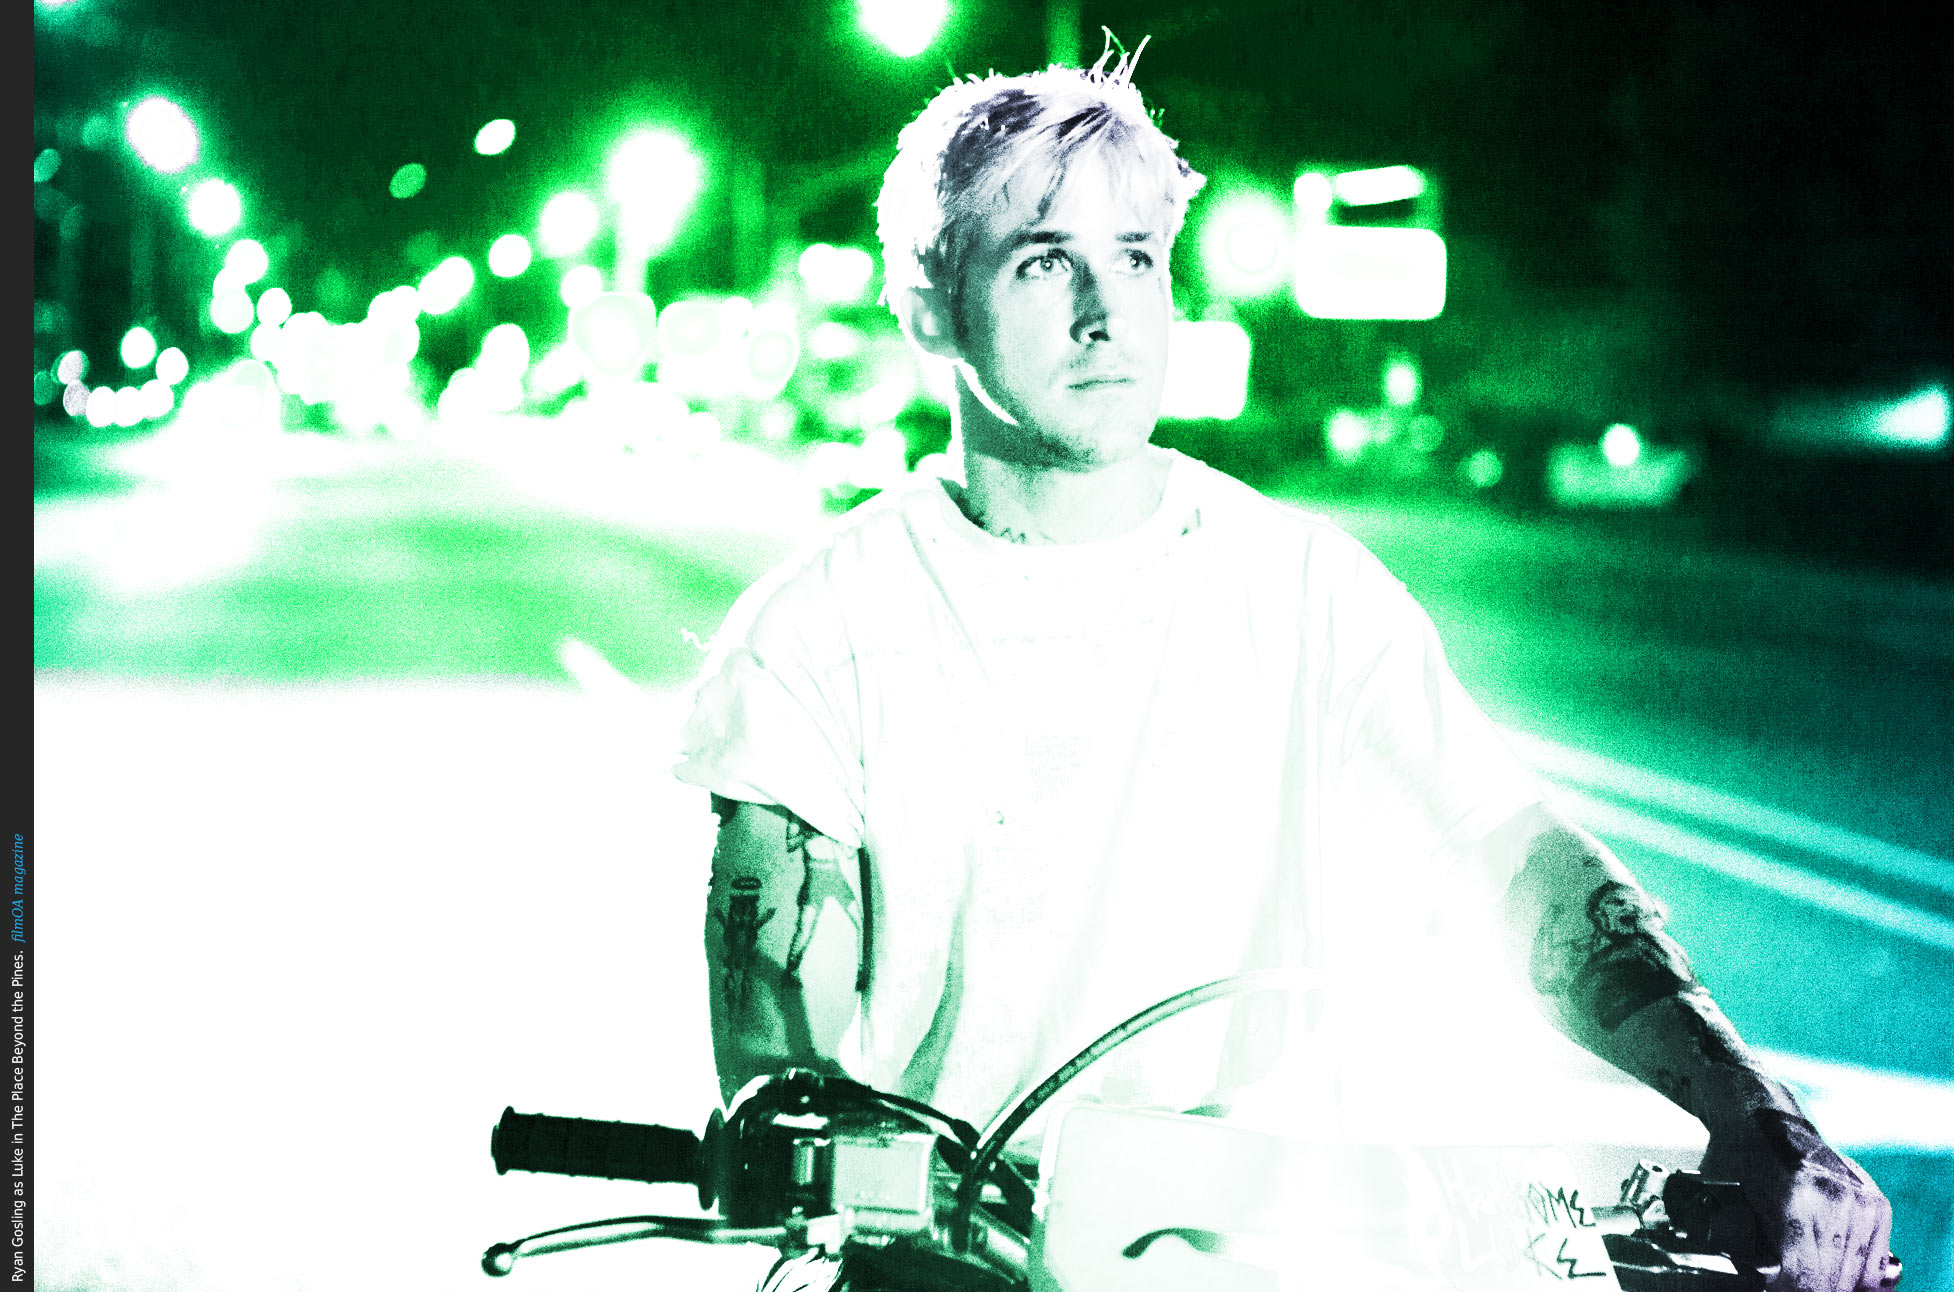 Ryan Gosling as Luke in The Place Beyond the Pines Poster filmOA